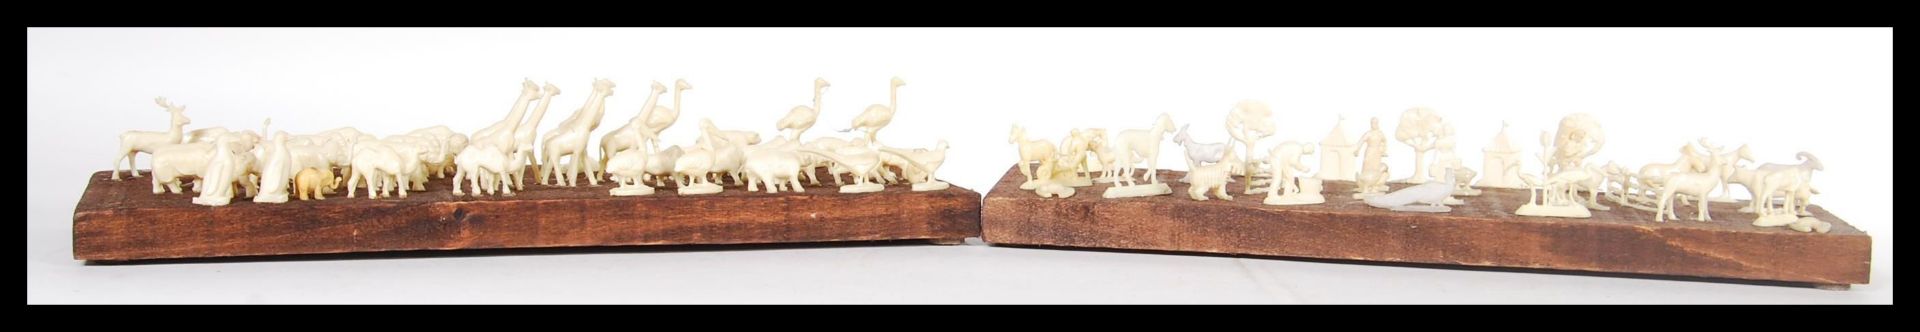 A selection of white faux ivory cast resin figures of animals mounted on a stained wooden base along